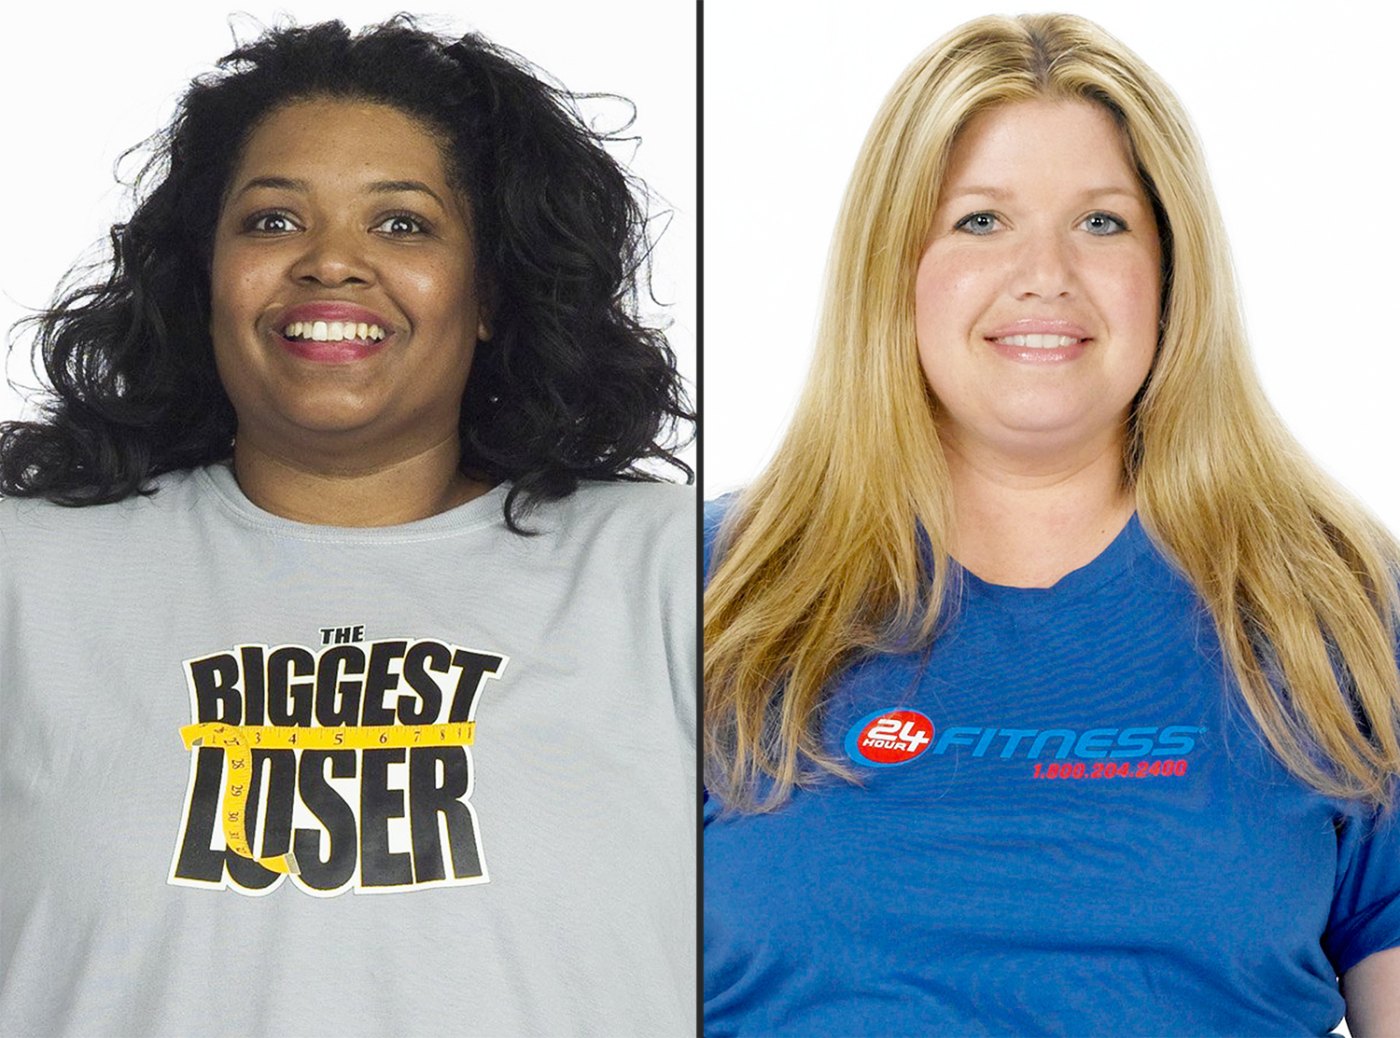 Where To Watch Biggest Loser Uk ‘Biggest Loser’ Contestants Claim the Show Gave Them Weight-Loss Pills